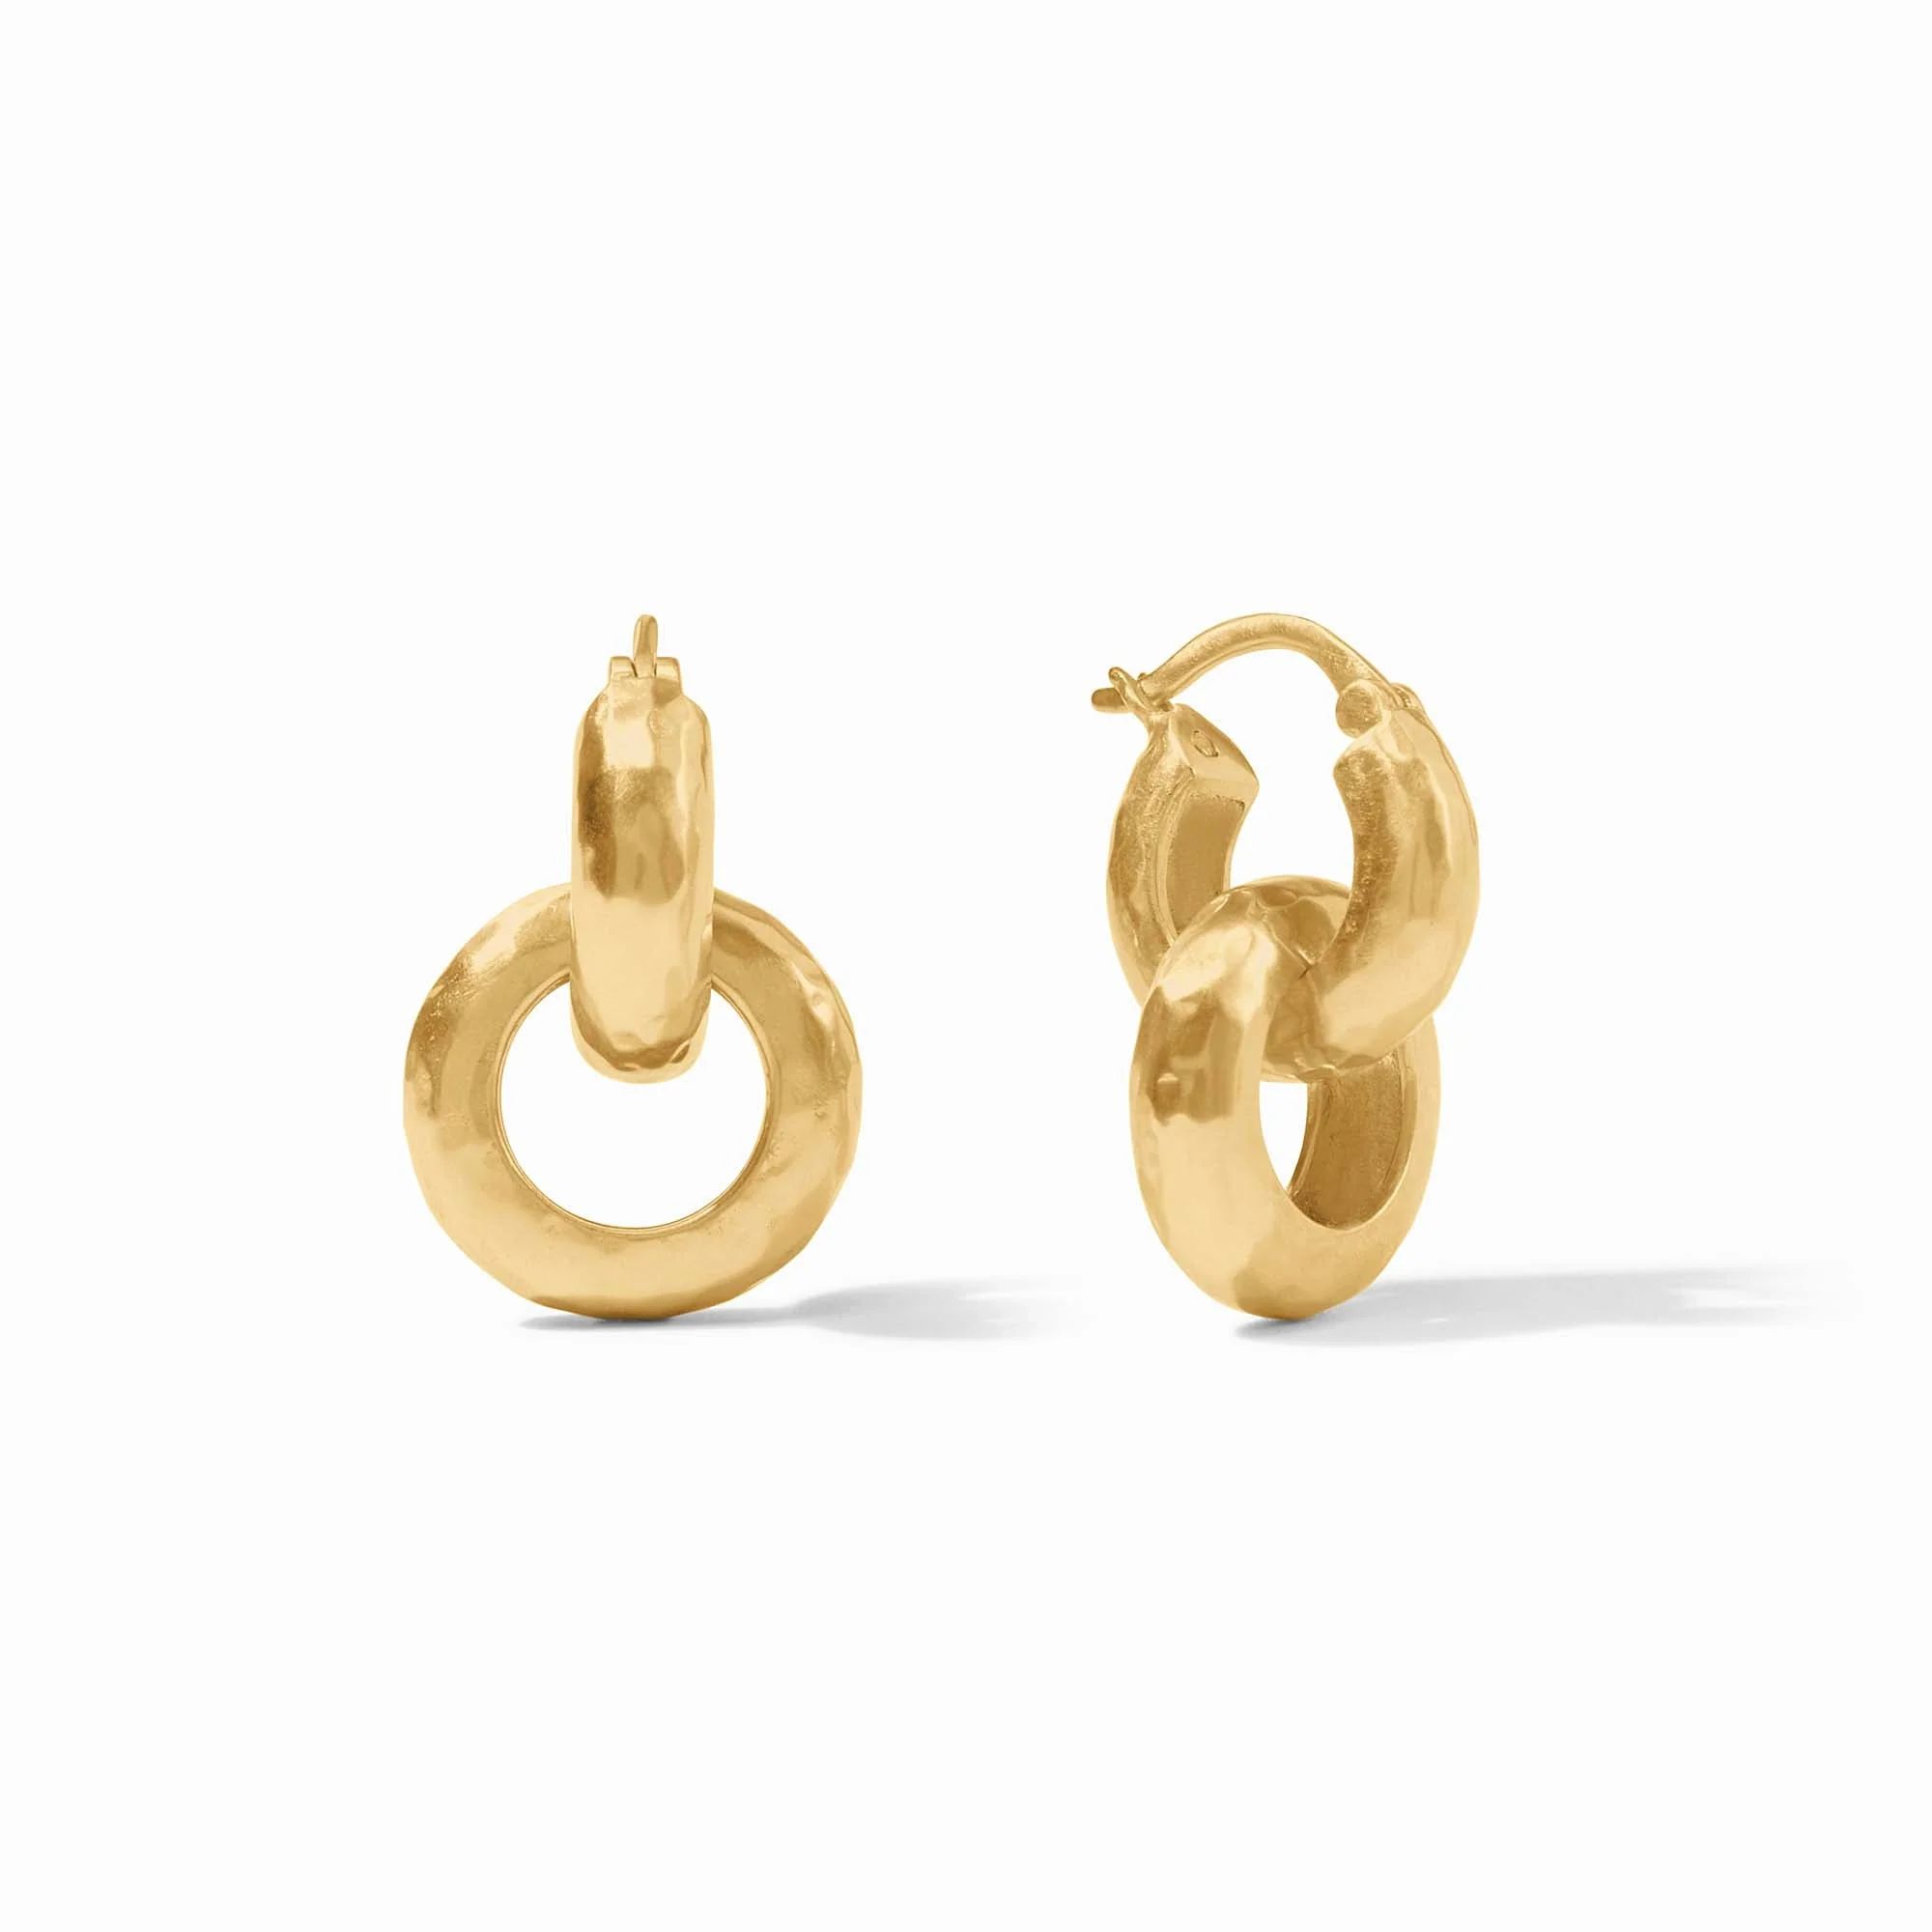 Catalina 2-in-1 Earring | Julie Vos